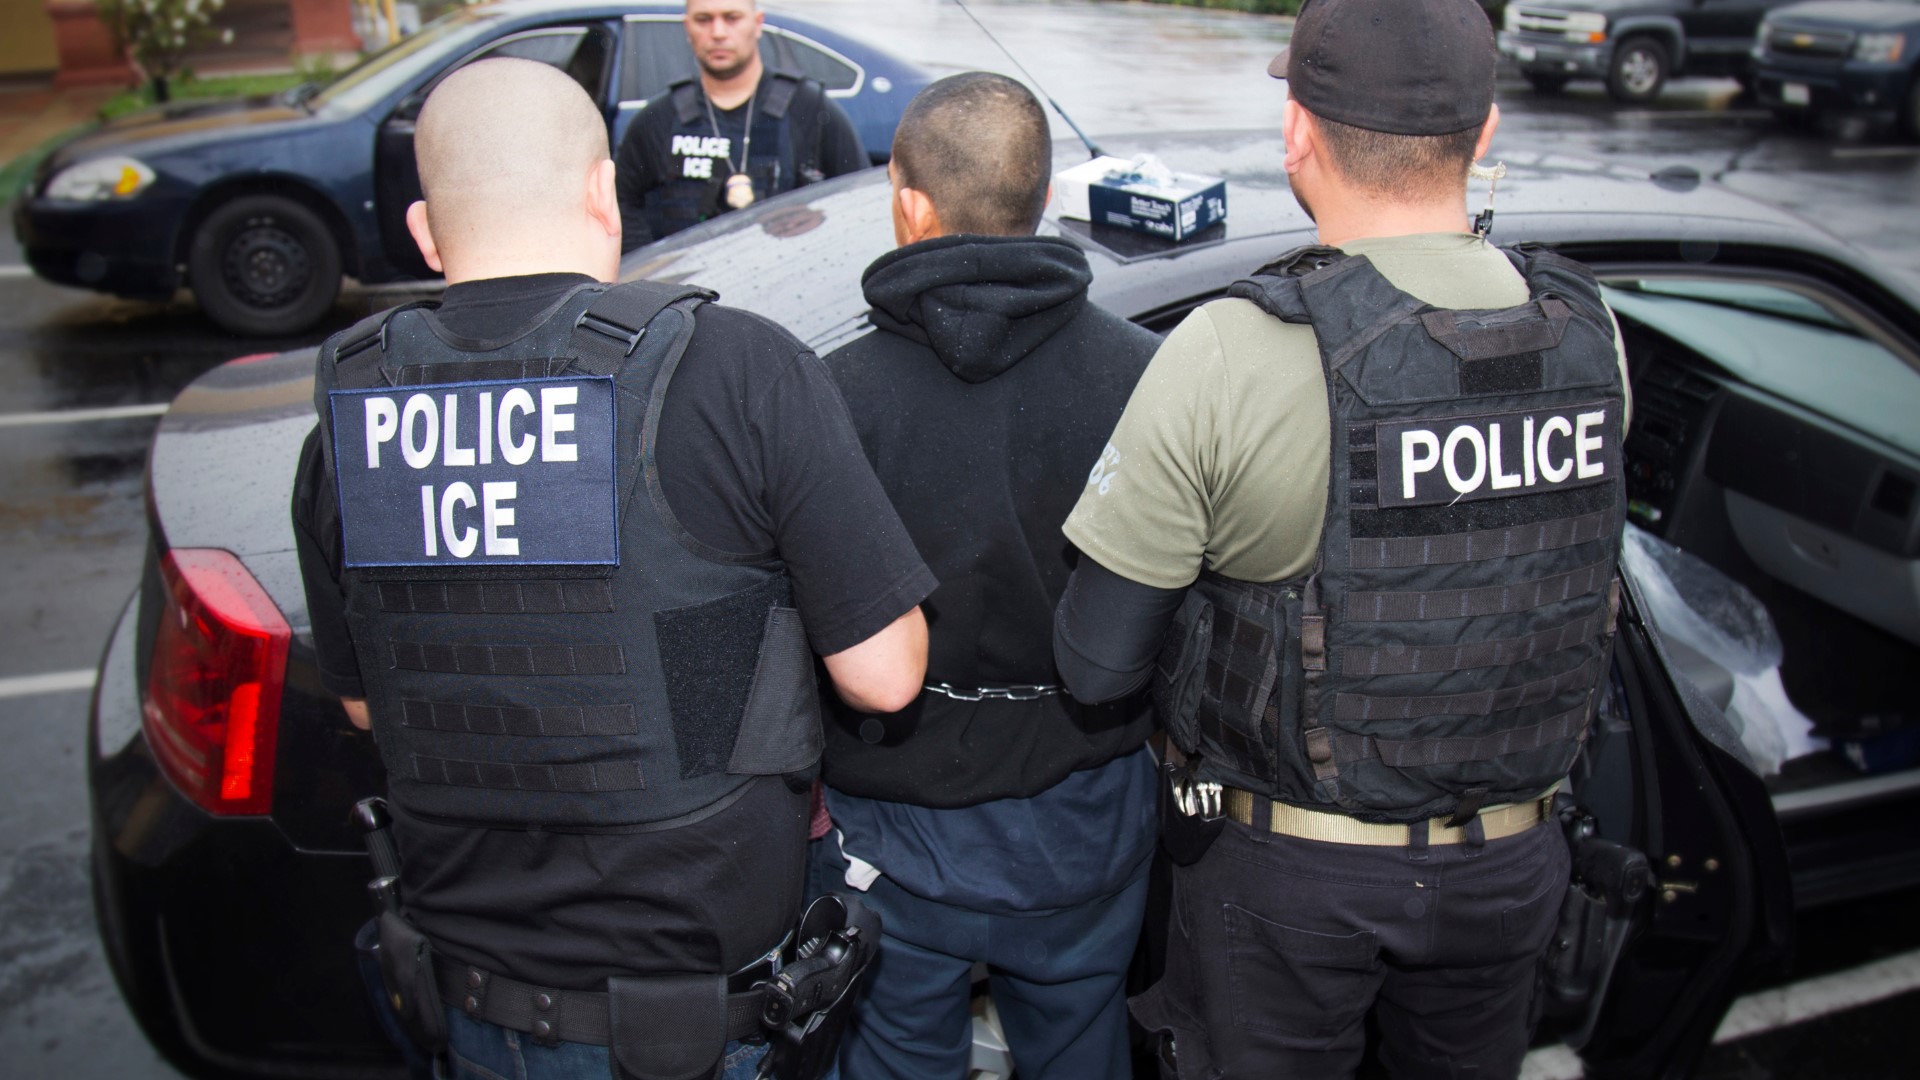 6 News had several questions about the so-called ‘raids,’  so we contacted former ICE Deportation Officer Edwardo Rodriguez to get some answers.